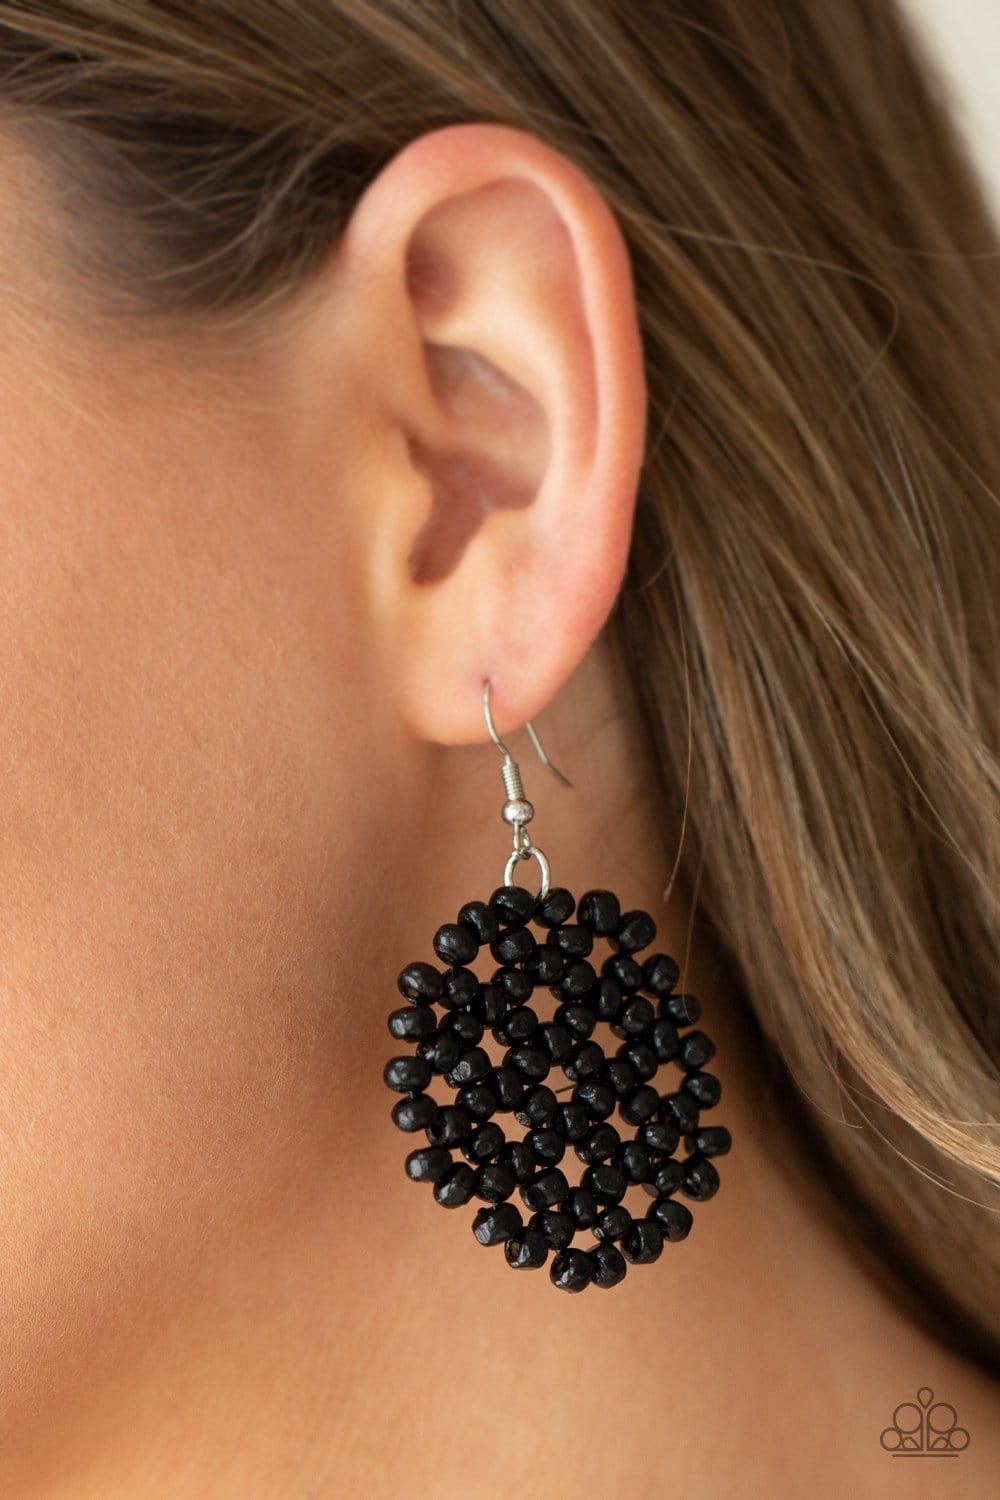 Paparazzi Accessories: Summer Escapade - Black Wooden Bead Earrings - Jewels N Thingz Boutique